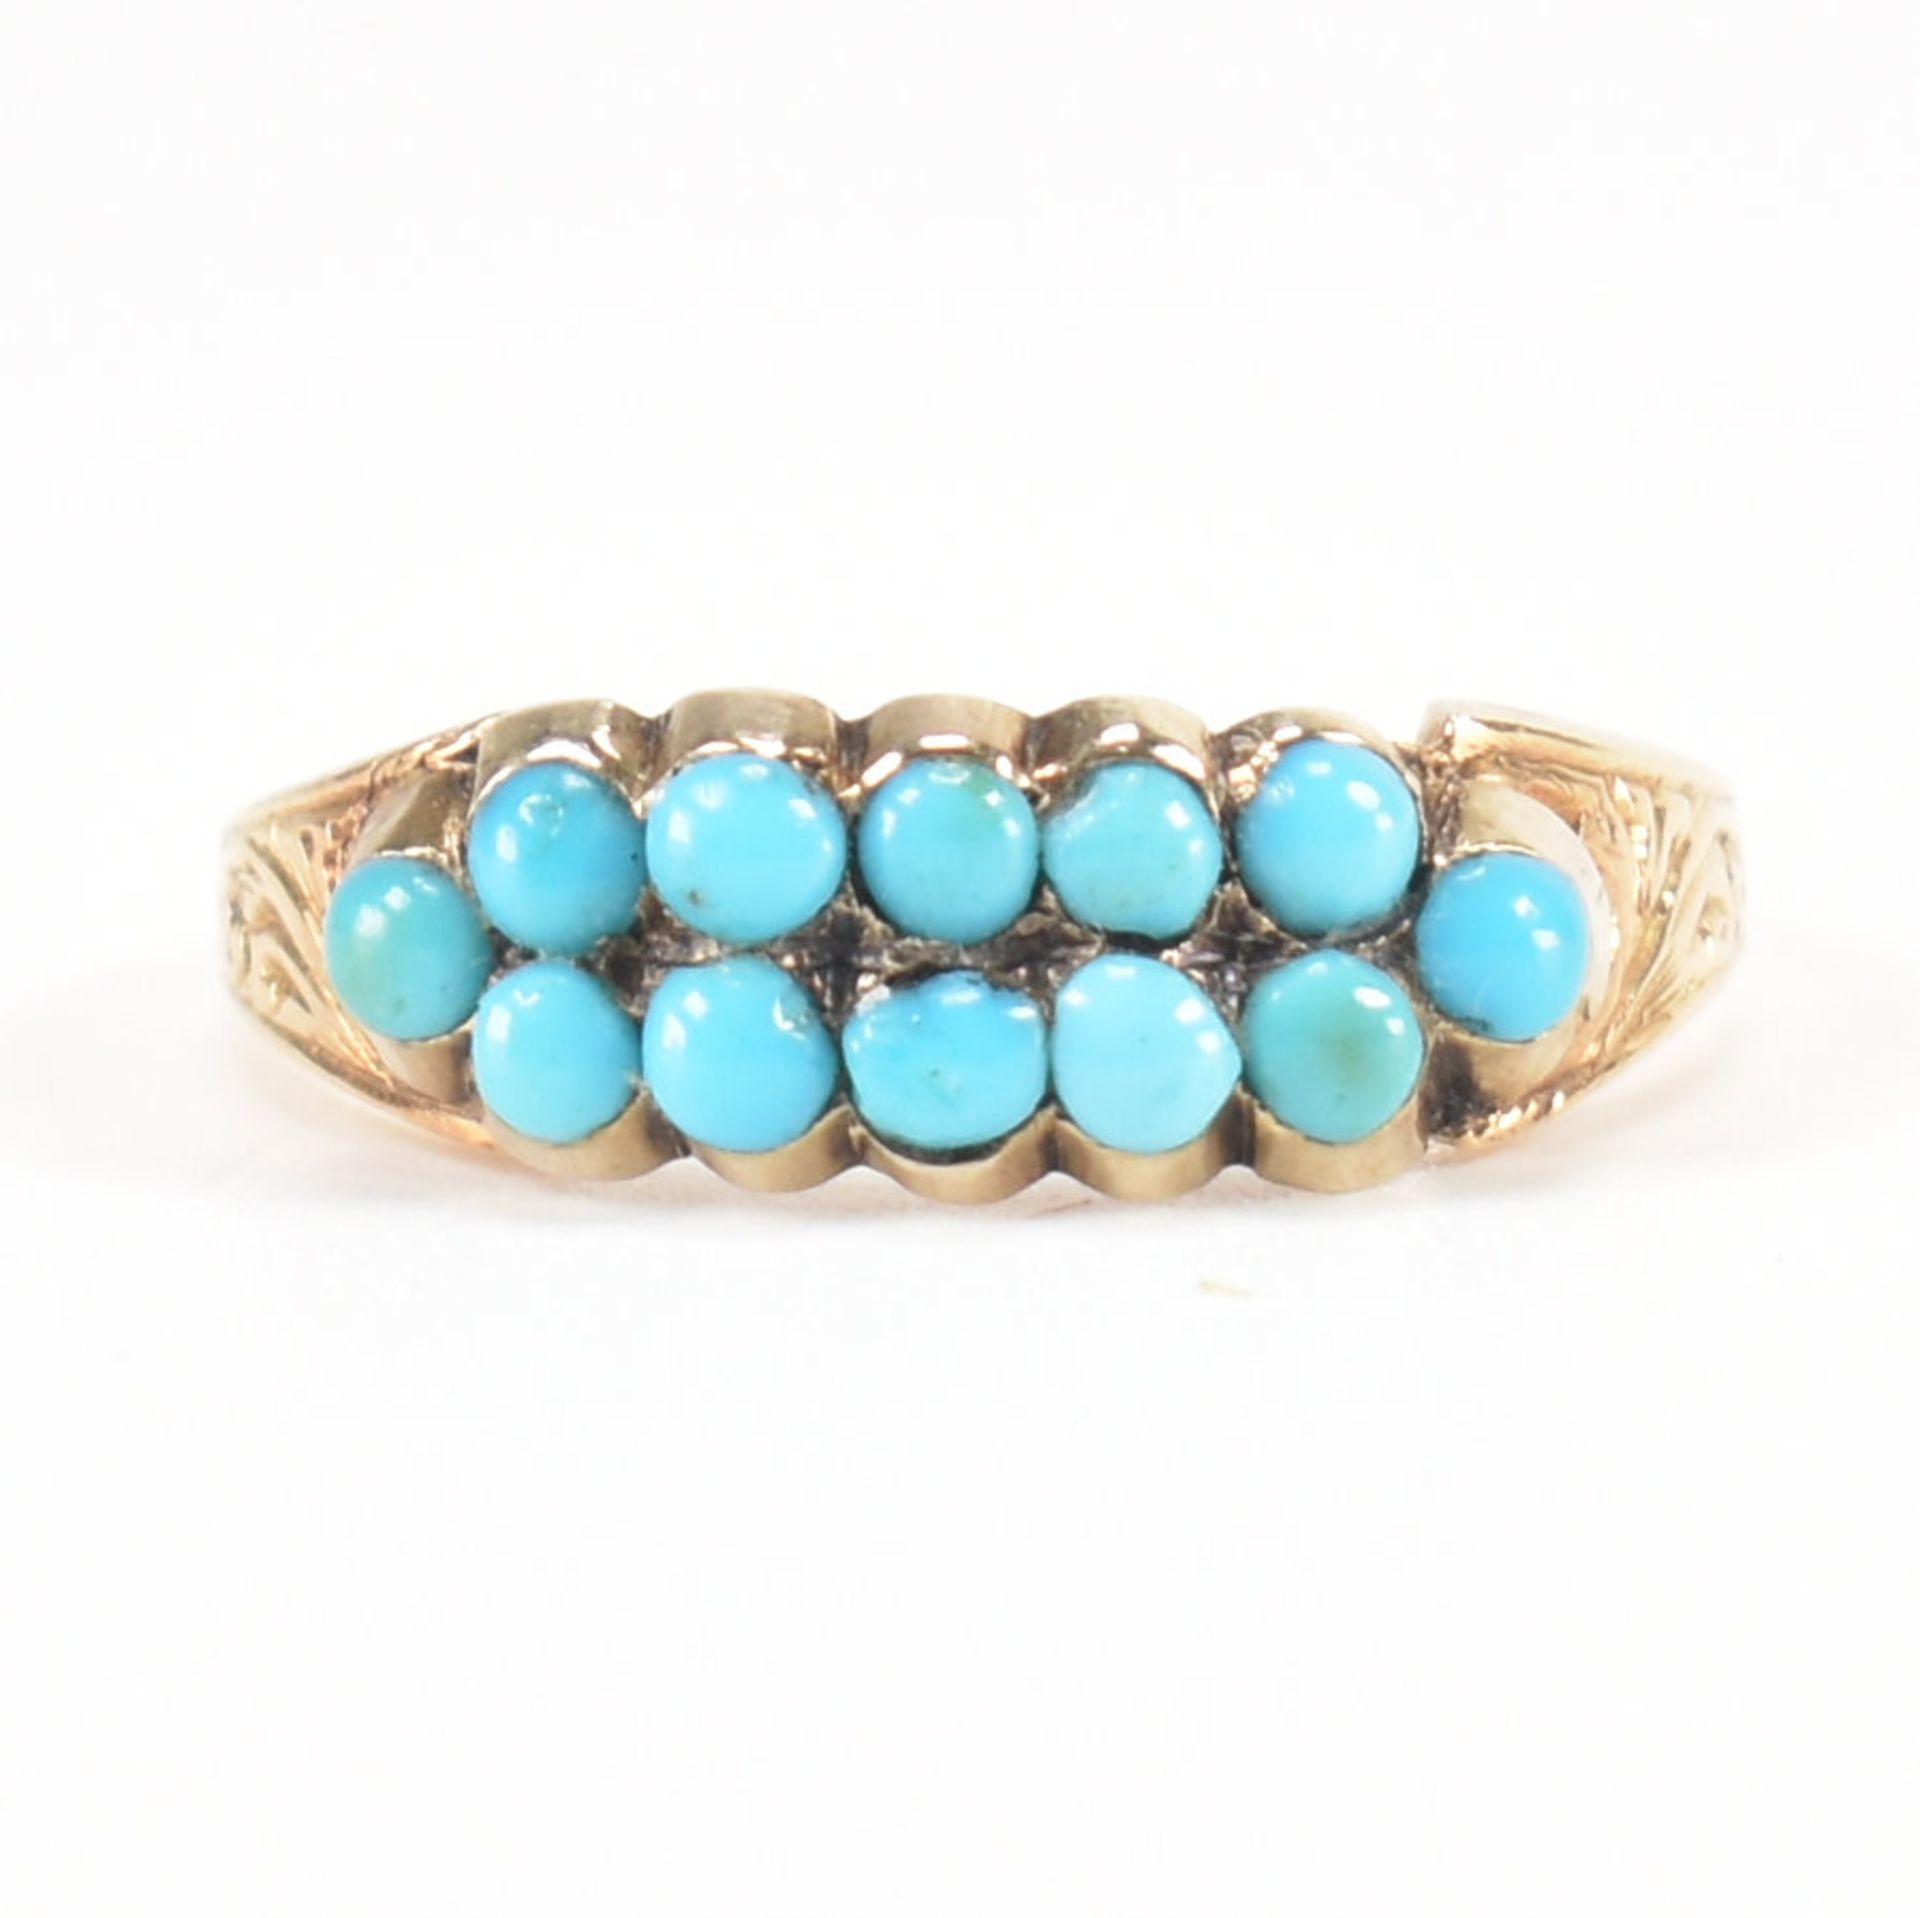 ANTIQUE GOLD & TURQUOISE GYPSY CLUSTER RING - Image 2 of 8